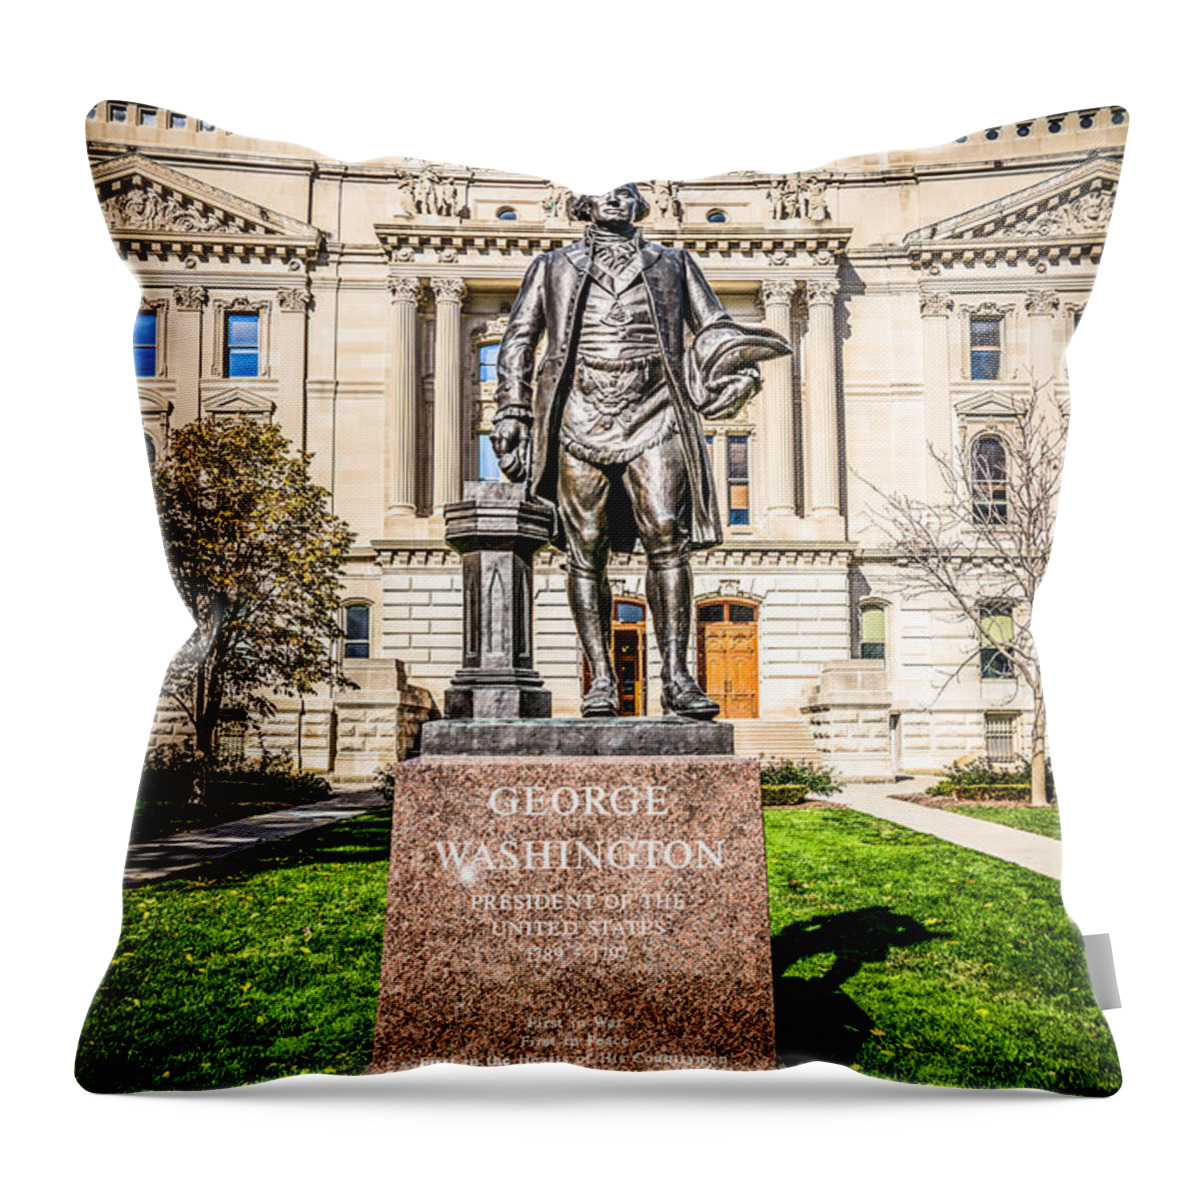 America Throw Pillow featuring the photograph George Washington Statue Indianapolis Indiana Statehouse by Paul Velgos